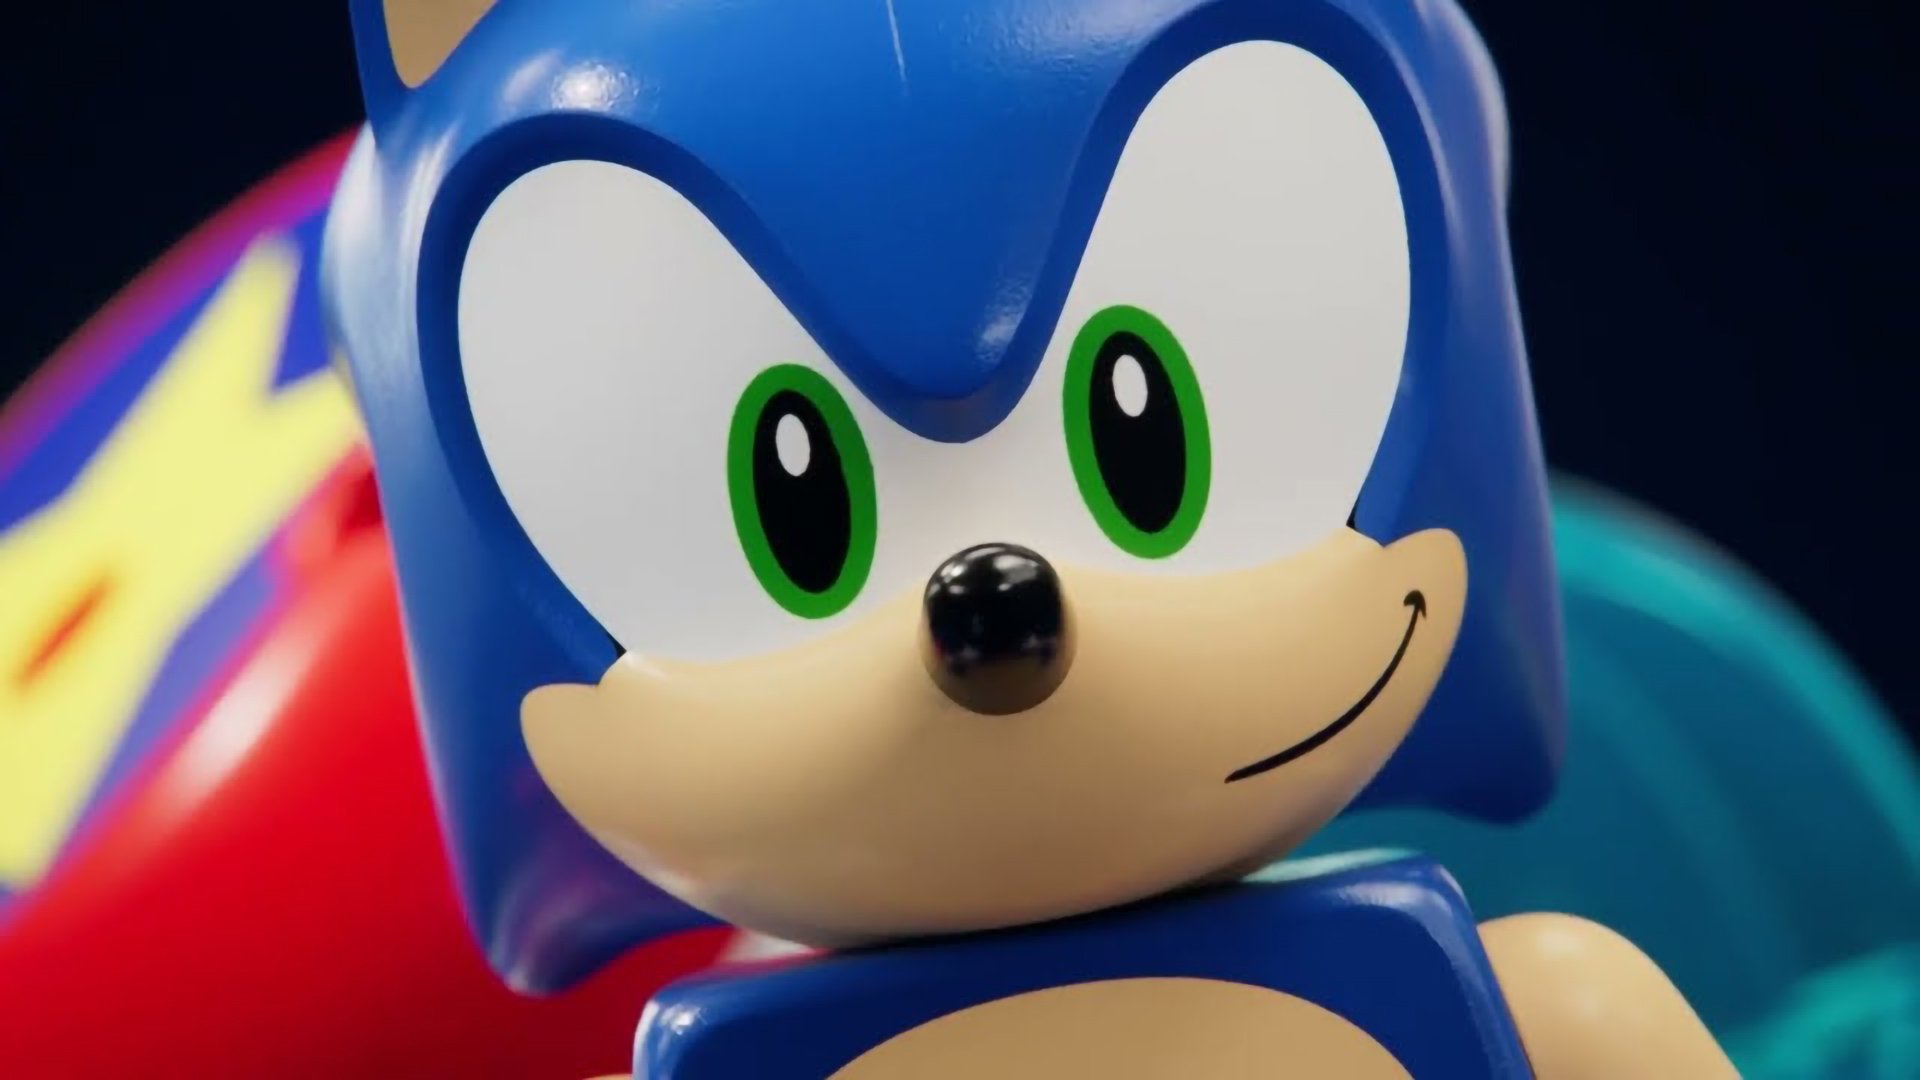 Sonic the Hedgehog 3 Set Image Reveals First Look at Shadow the